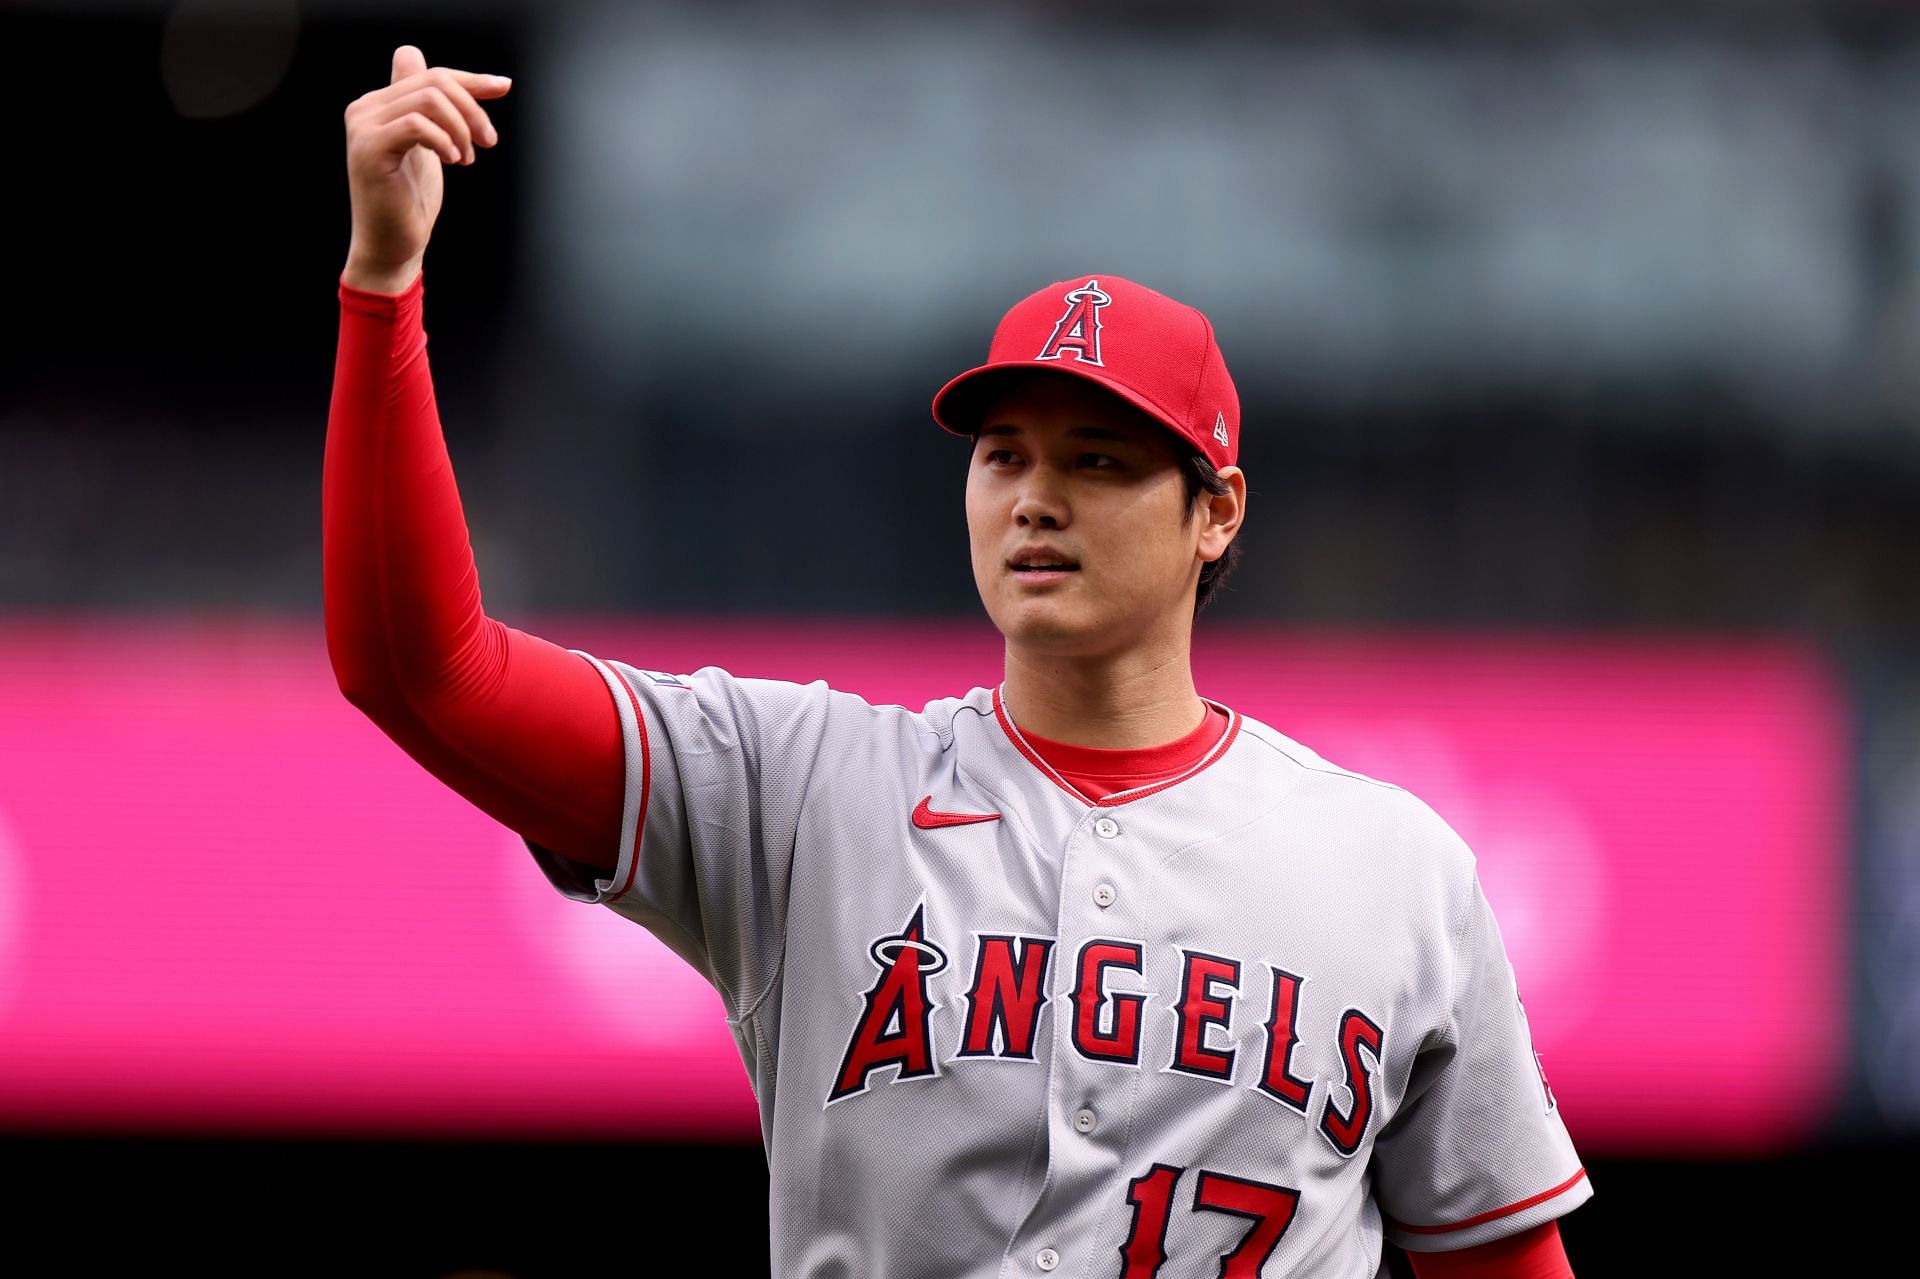 Shohei Ohtani #17 of the Los Angeles Angels reacts during the first inning against the Seattle Mariners